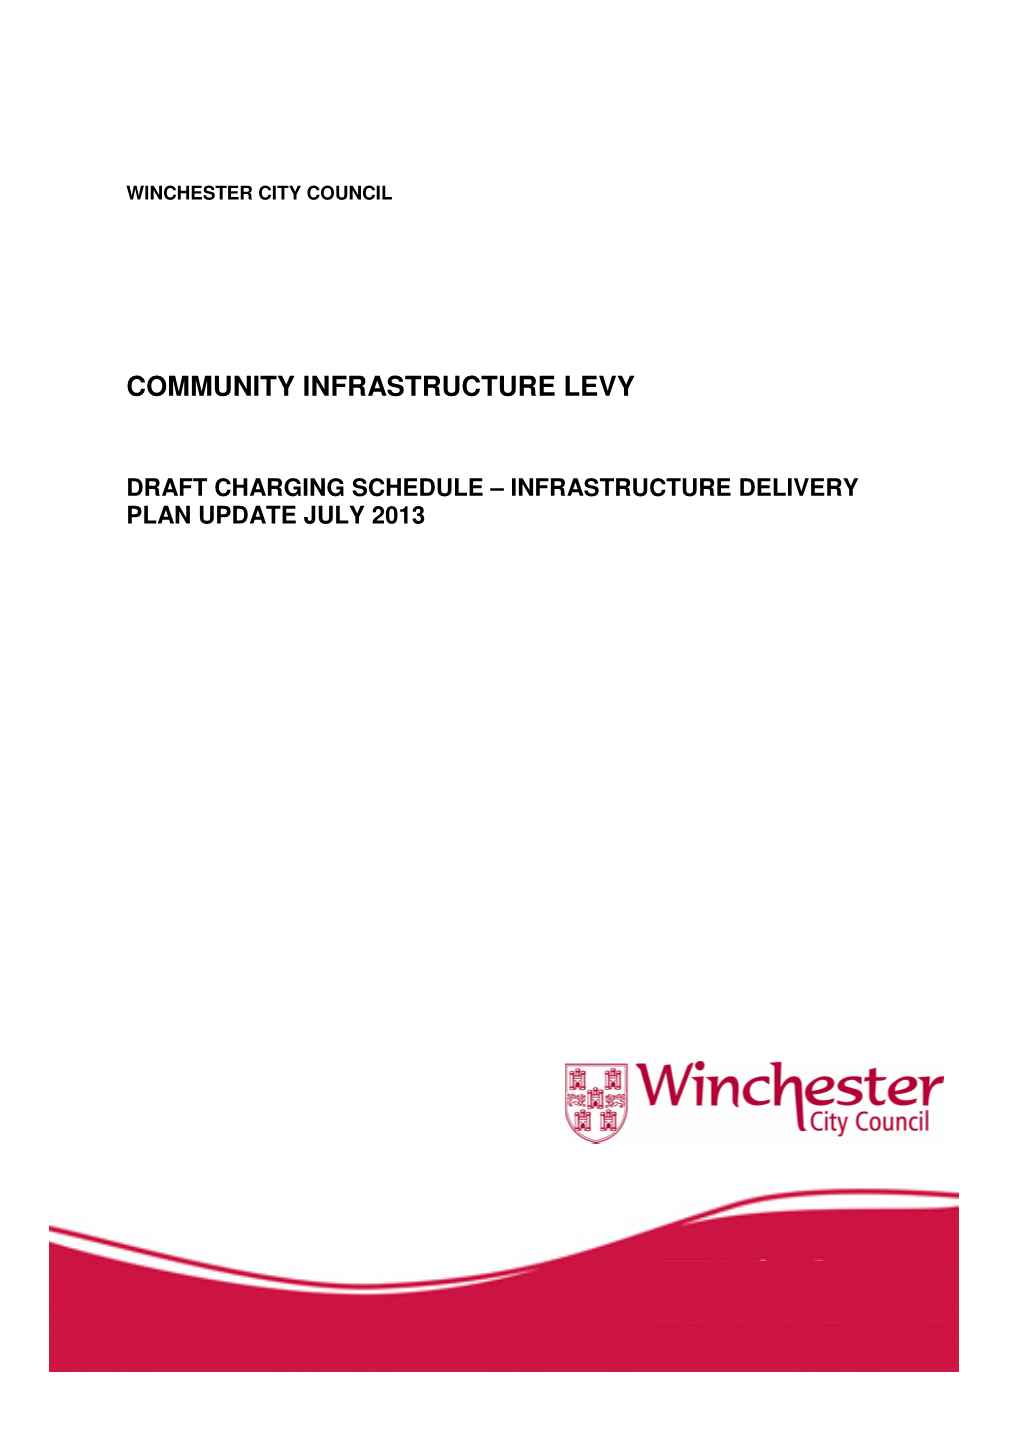 Winchester Infrastructure Delivery Plan Update